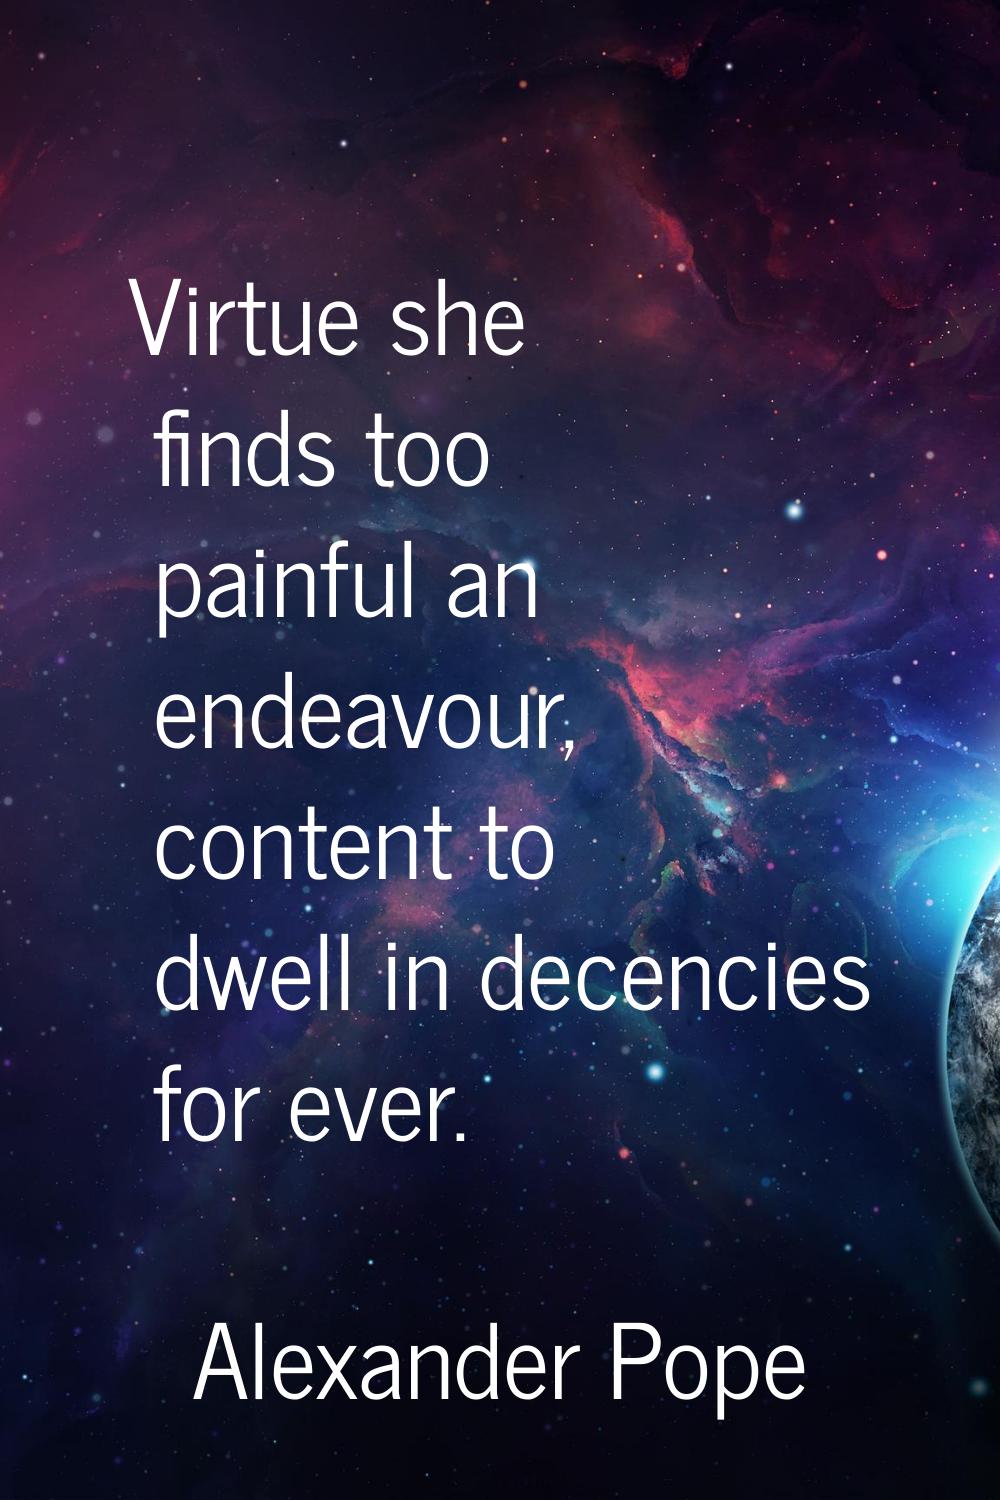 Virtue she finds too painful an endeavour, content to dwell in decencies for ever.